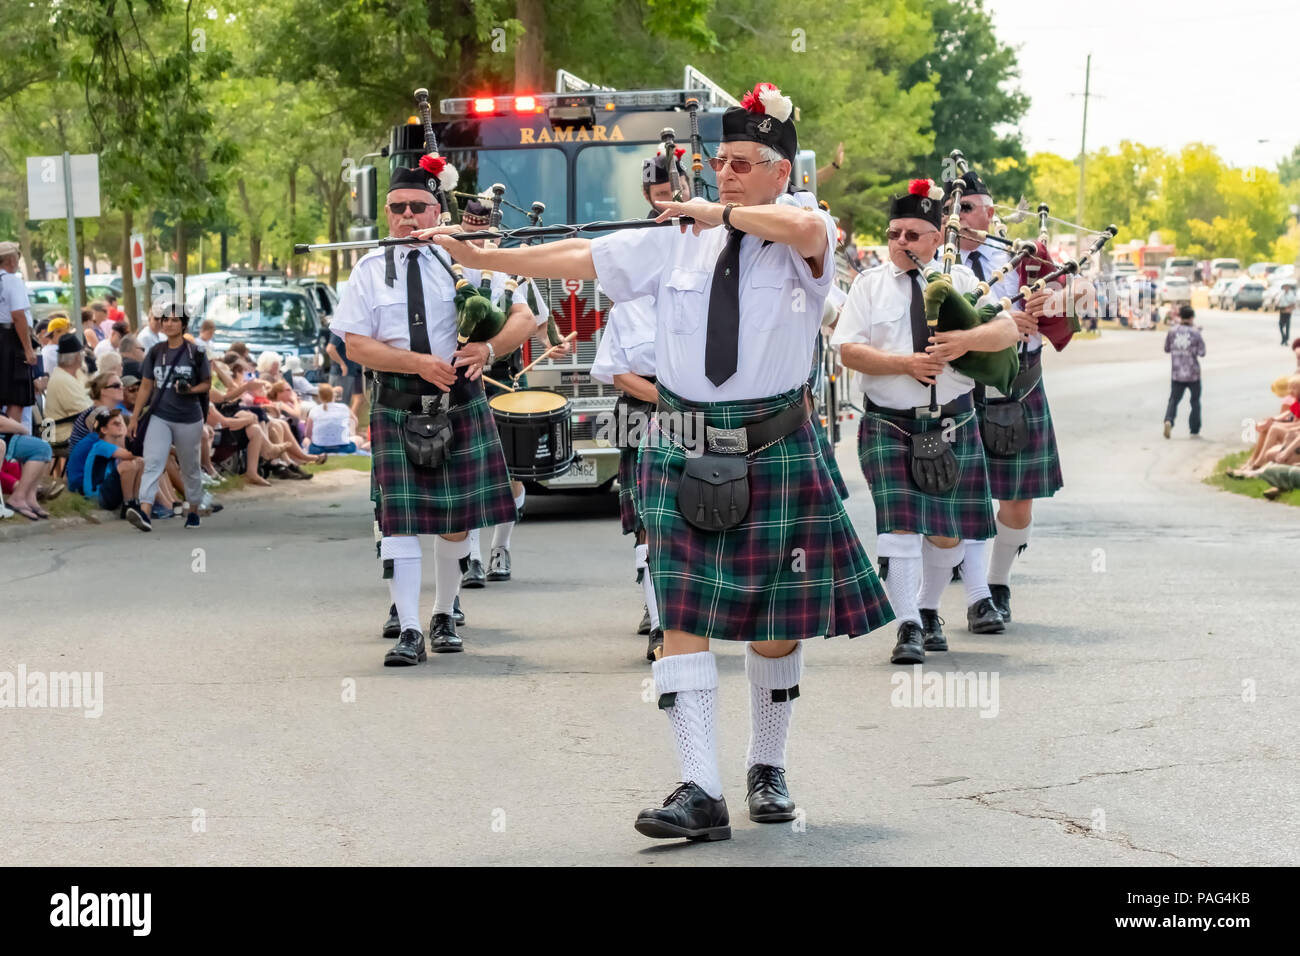 Members of the Highland Creek Branch of the Royal Canadian Legion march in the 41st Annual Scottish Festival in Orillia Ontario. Stock Photo